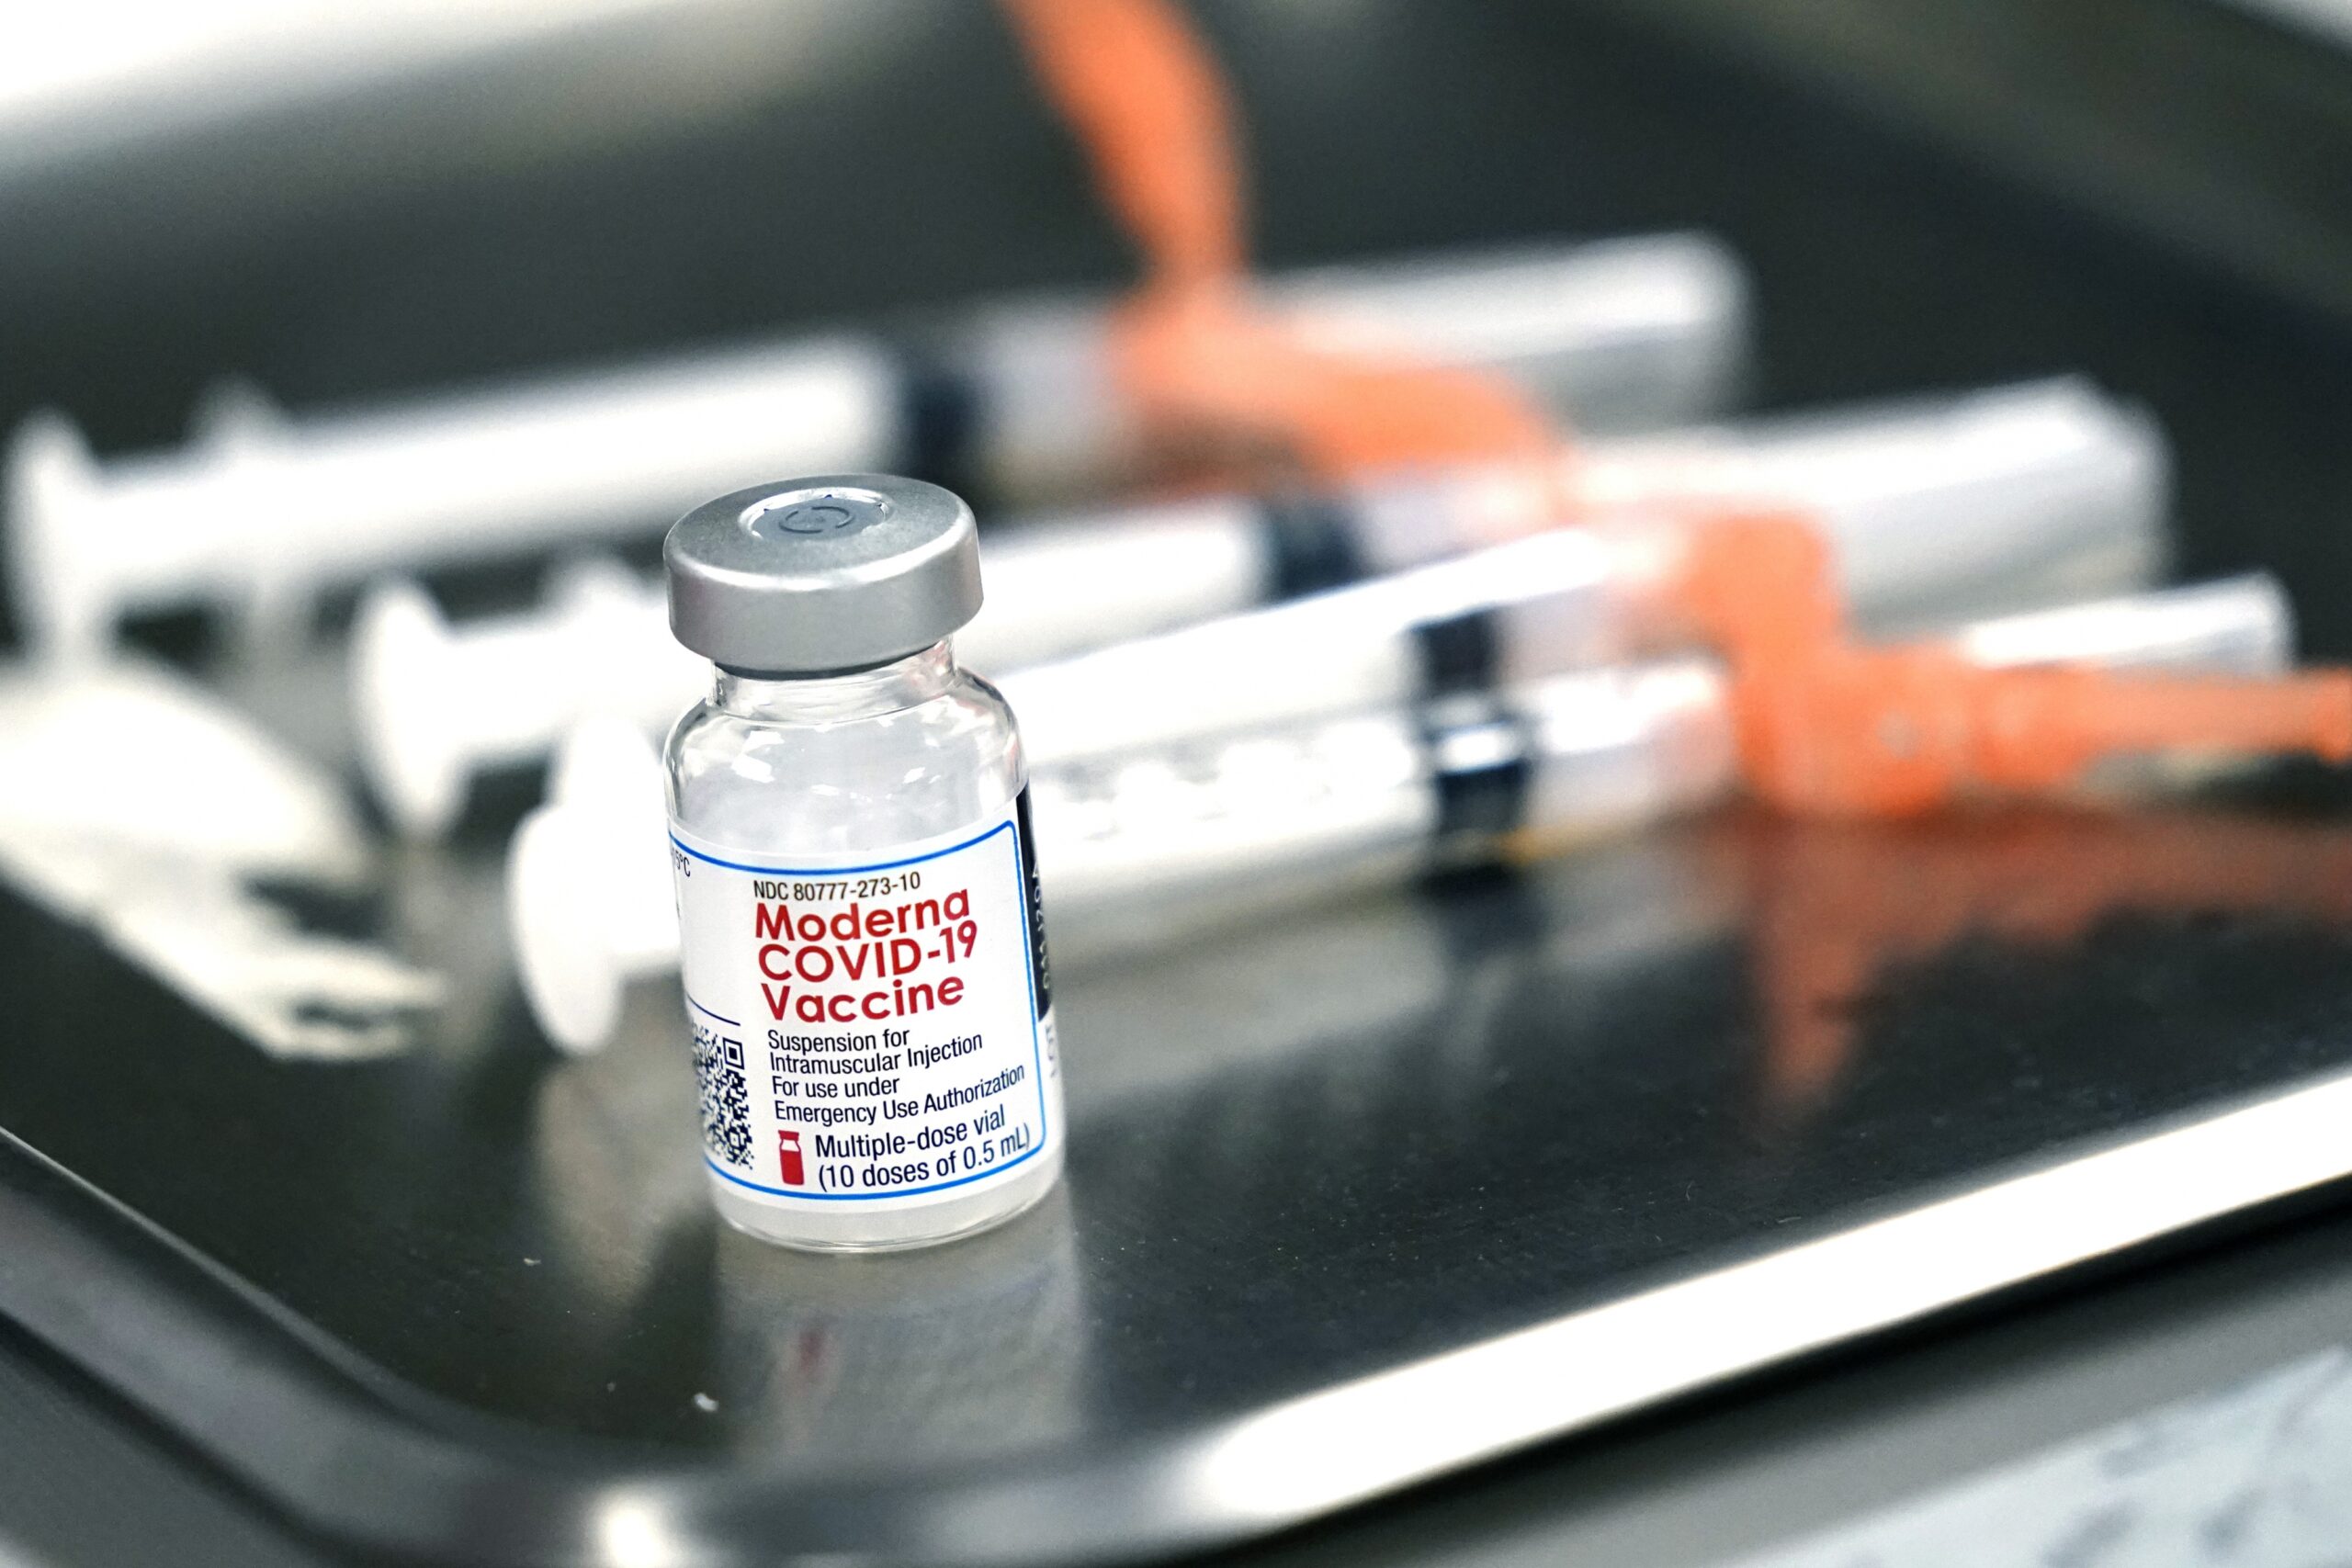 Syringes with doses of the Moderna COVID-19 vaccine